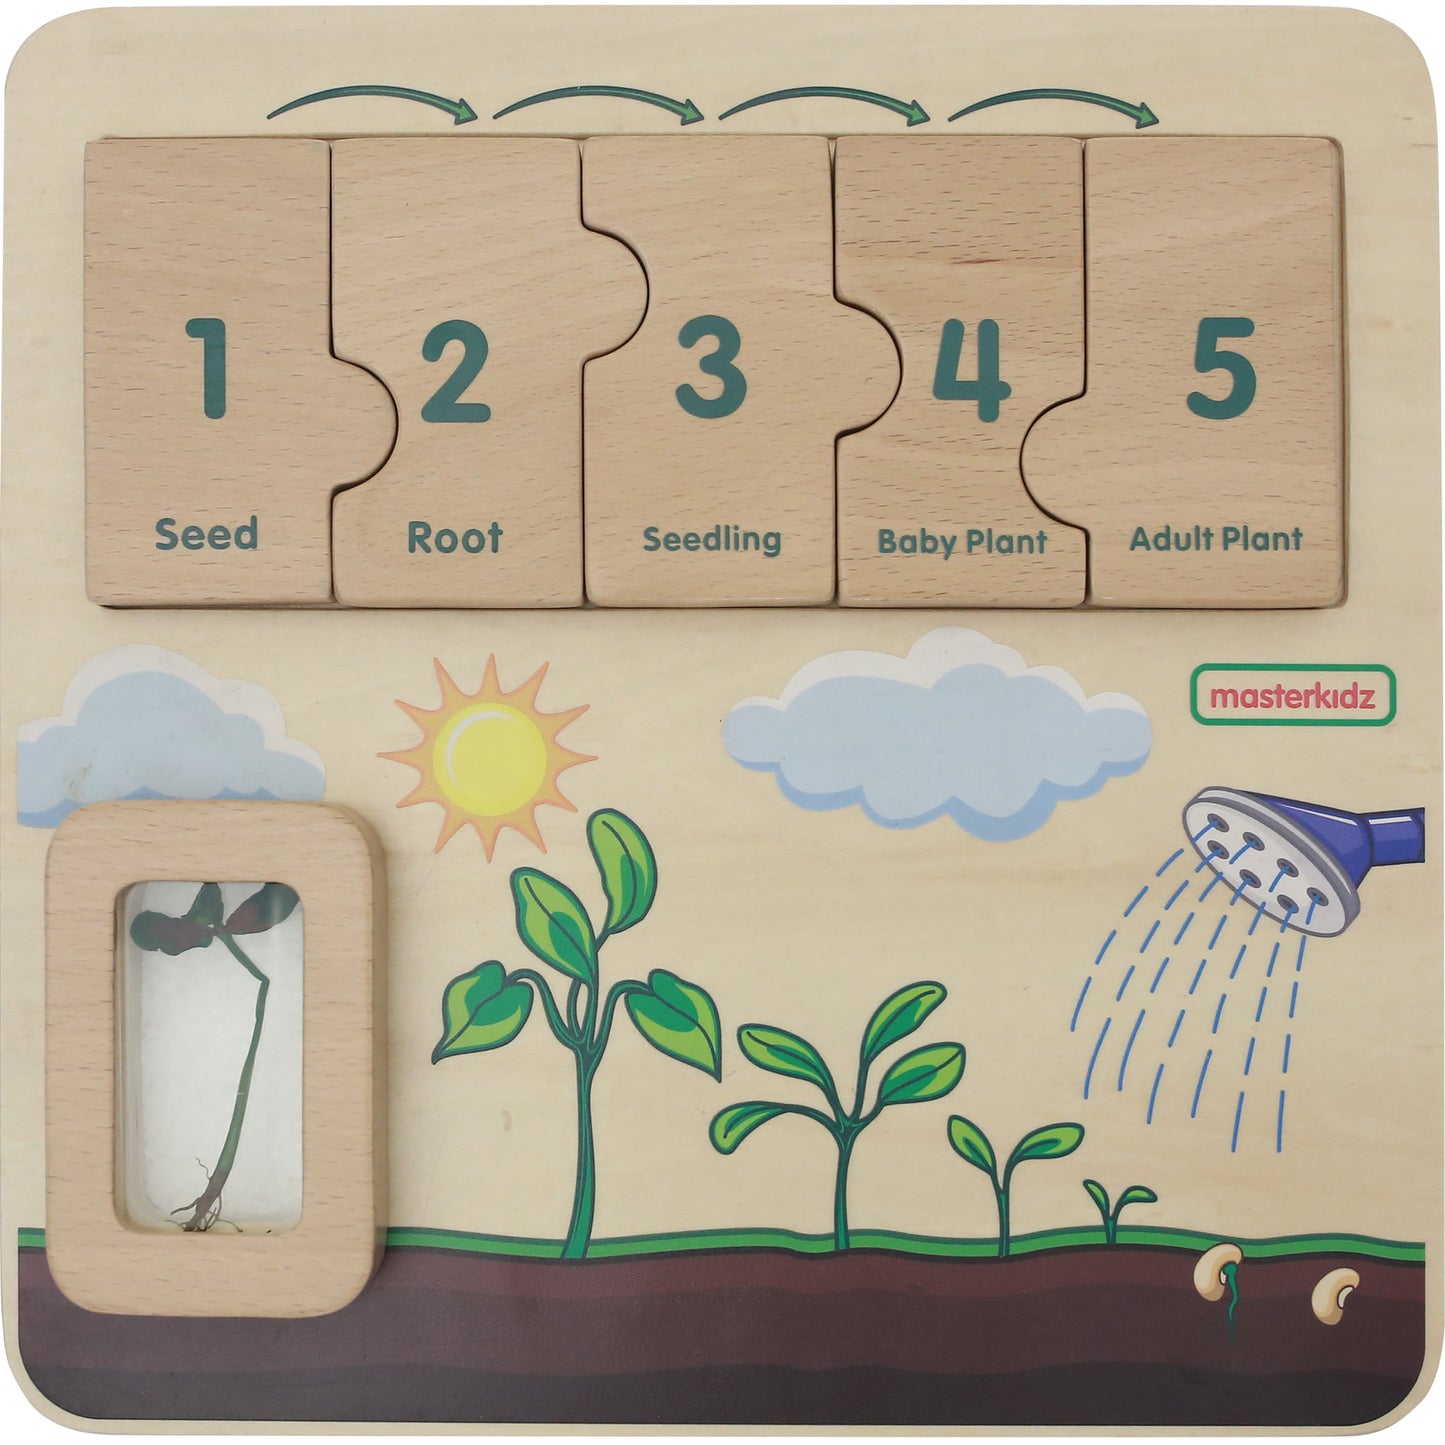 Masterkidz Plant Life Cycle Handy Learning  Board 植物成長學習板